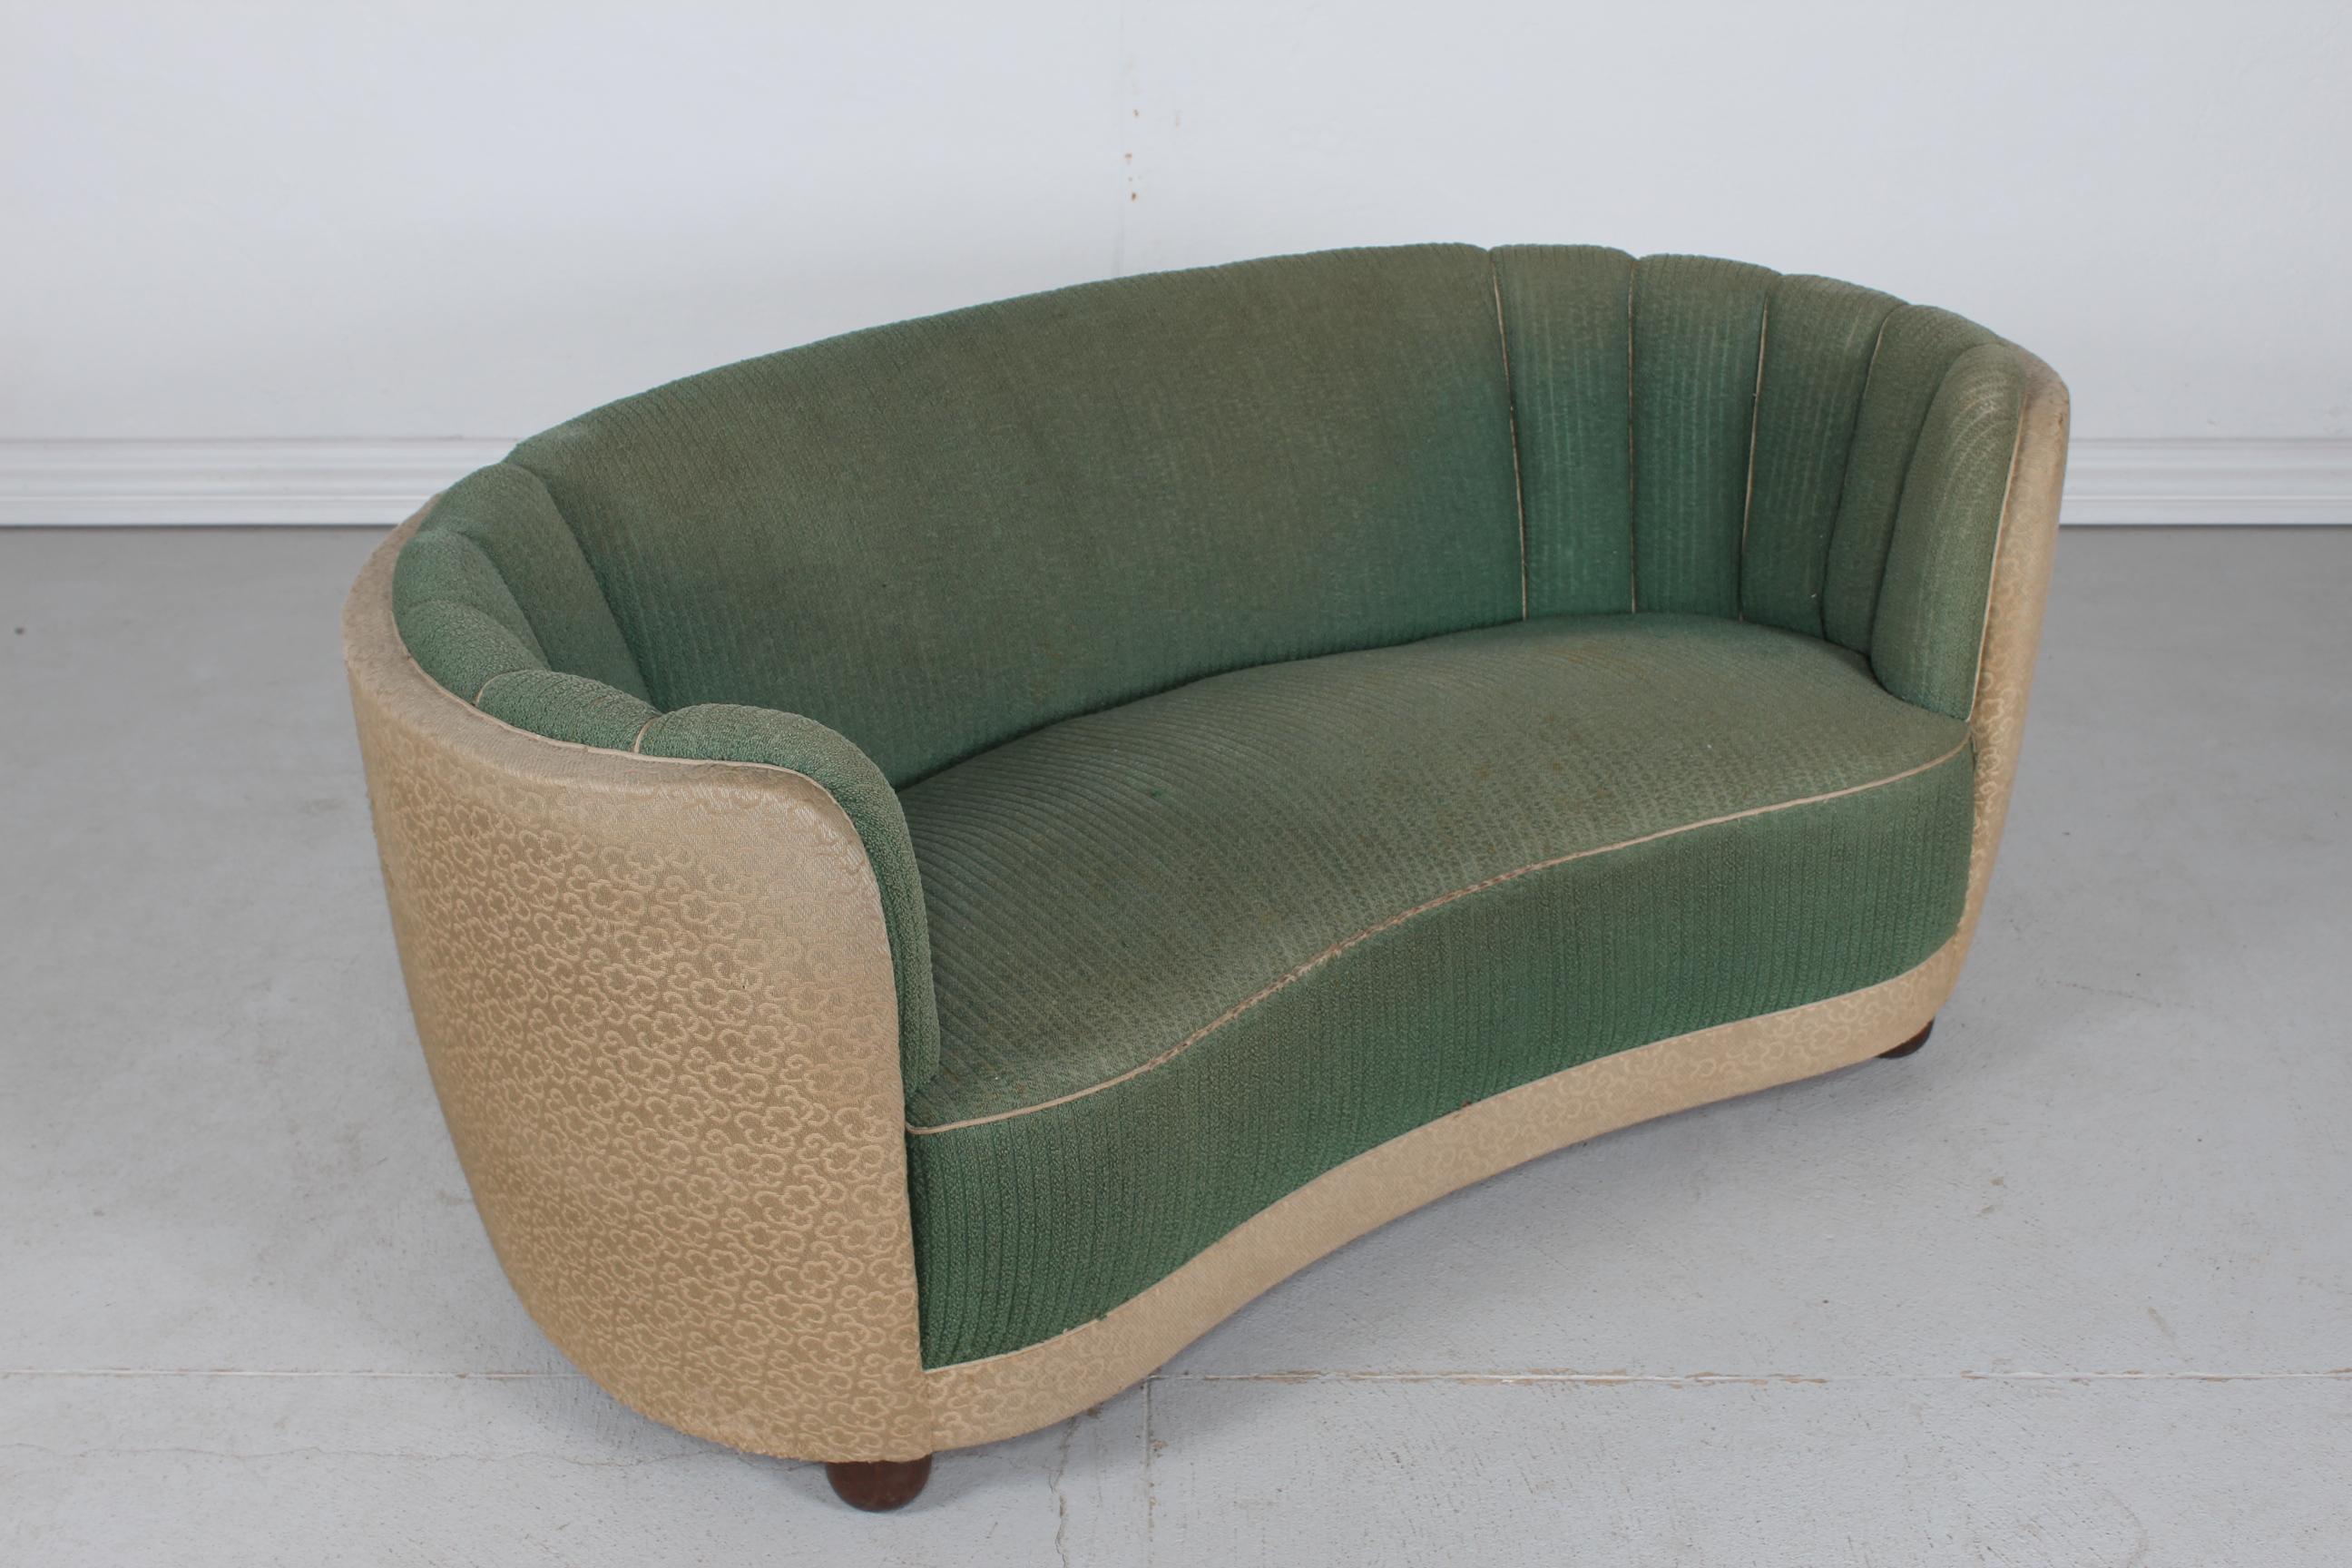 Danish Art Deco Curved Sofa Couch 1930s for Reupholstery For Sale 1